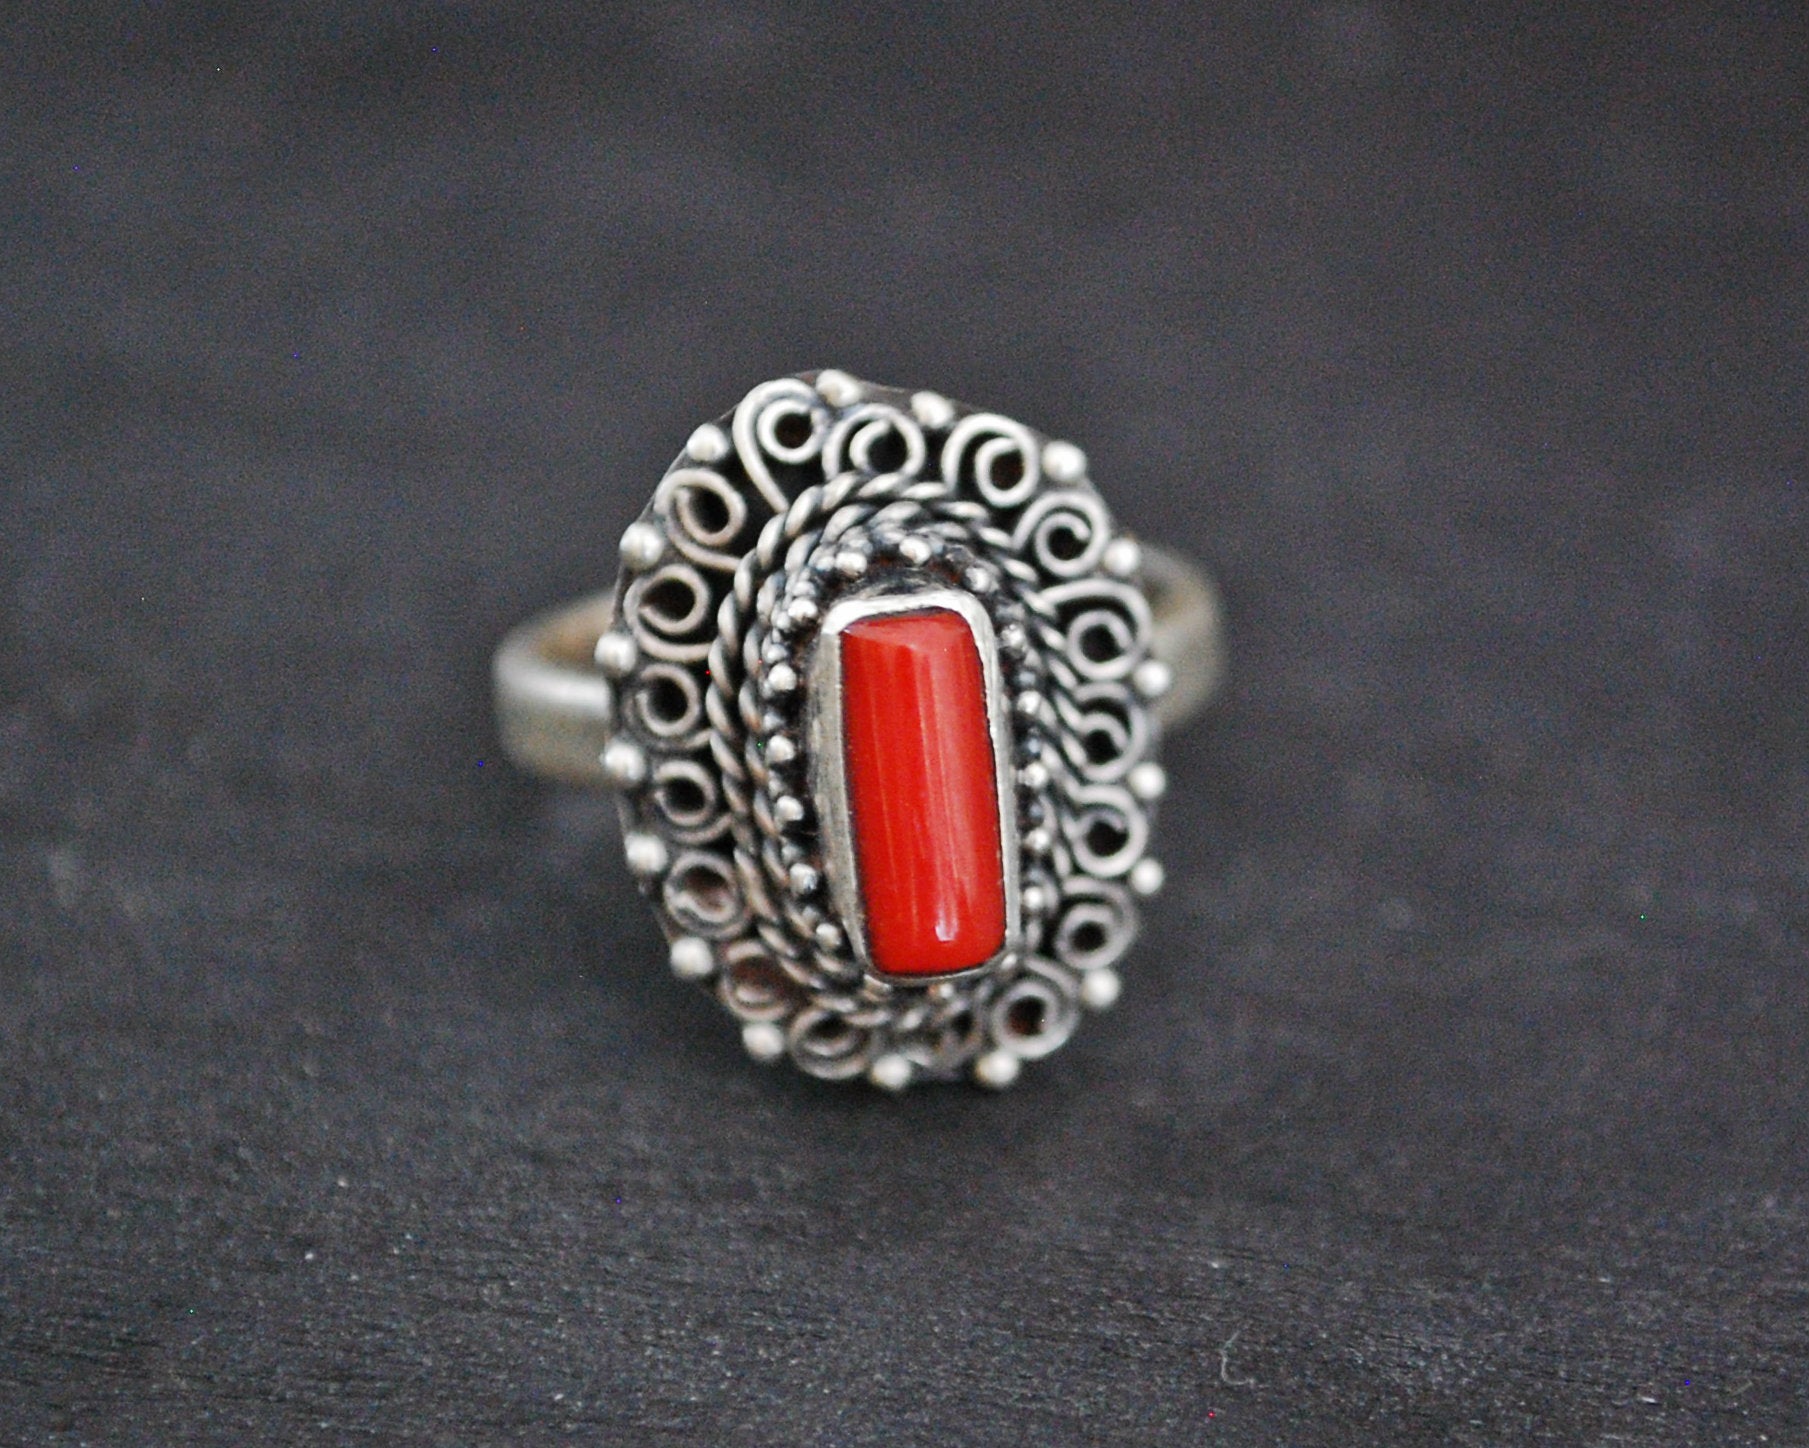 Nepali Coral Silver Ring - Size 8